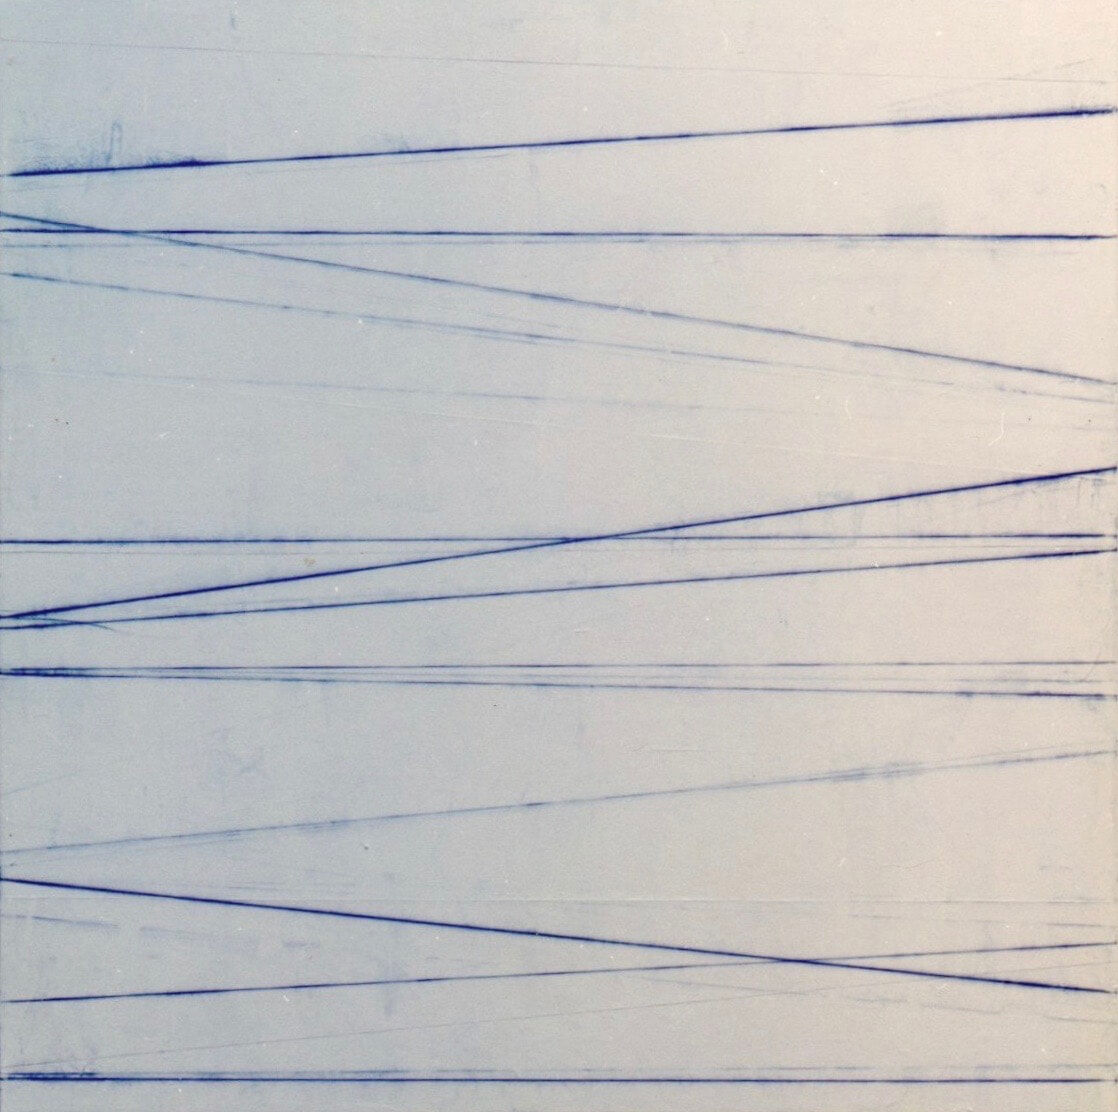 Untitled (Blue lines) #4